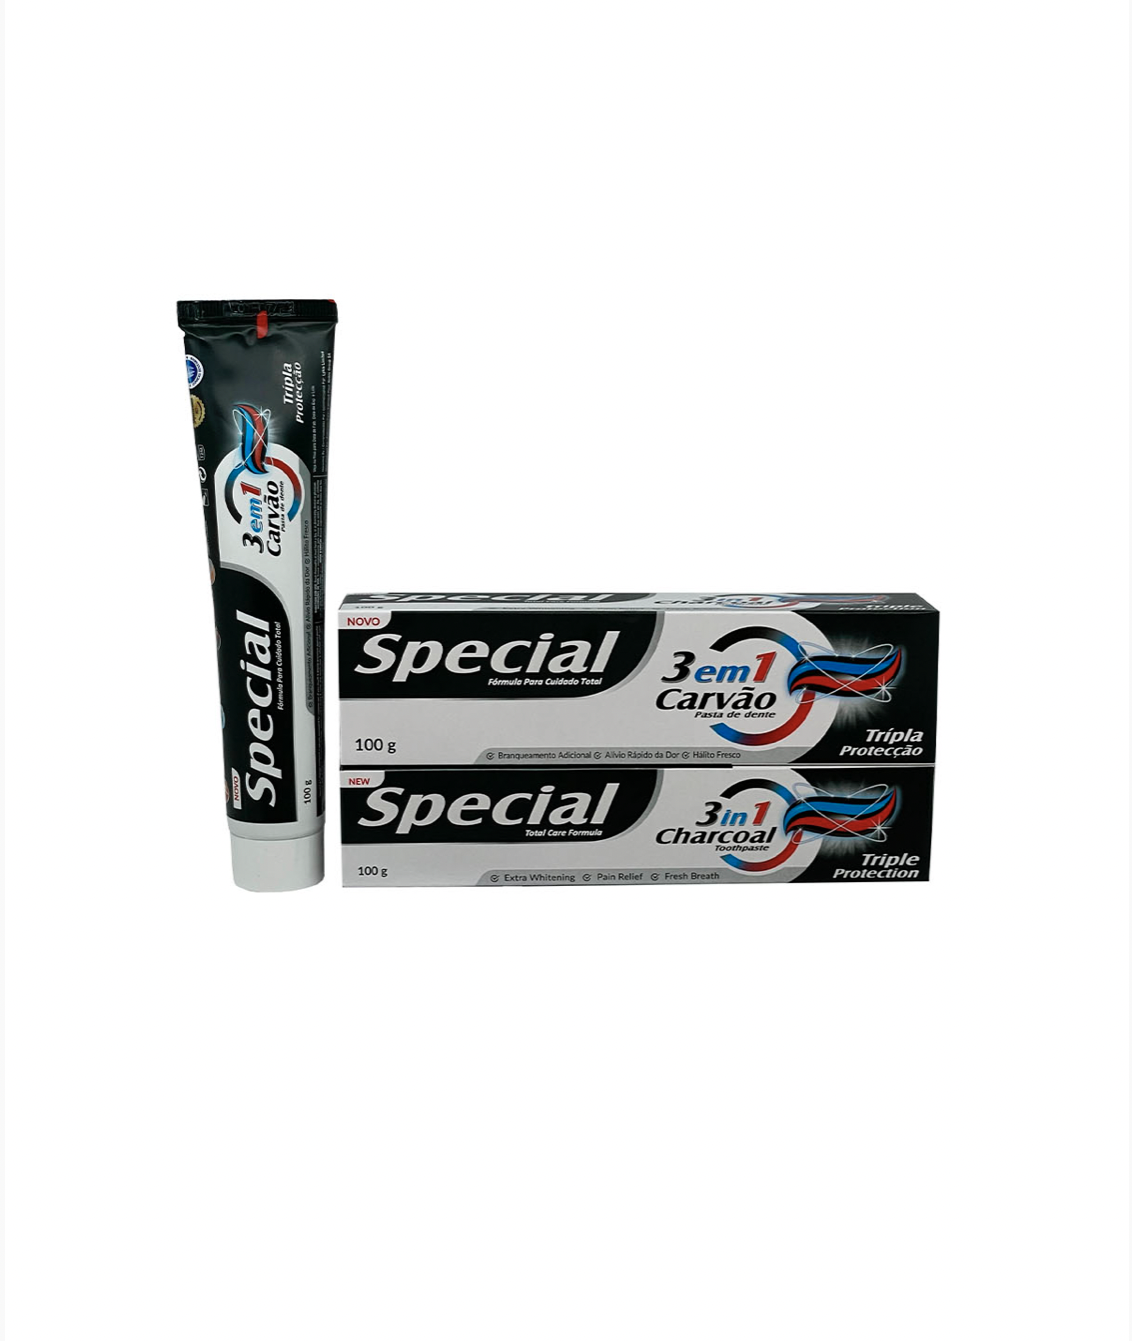   / Special -      31   Charcoal 100 